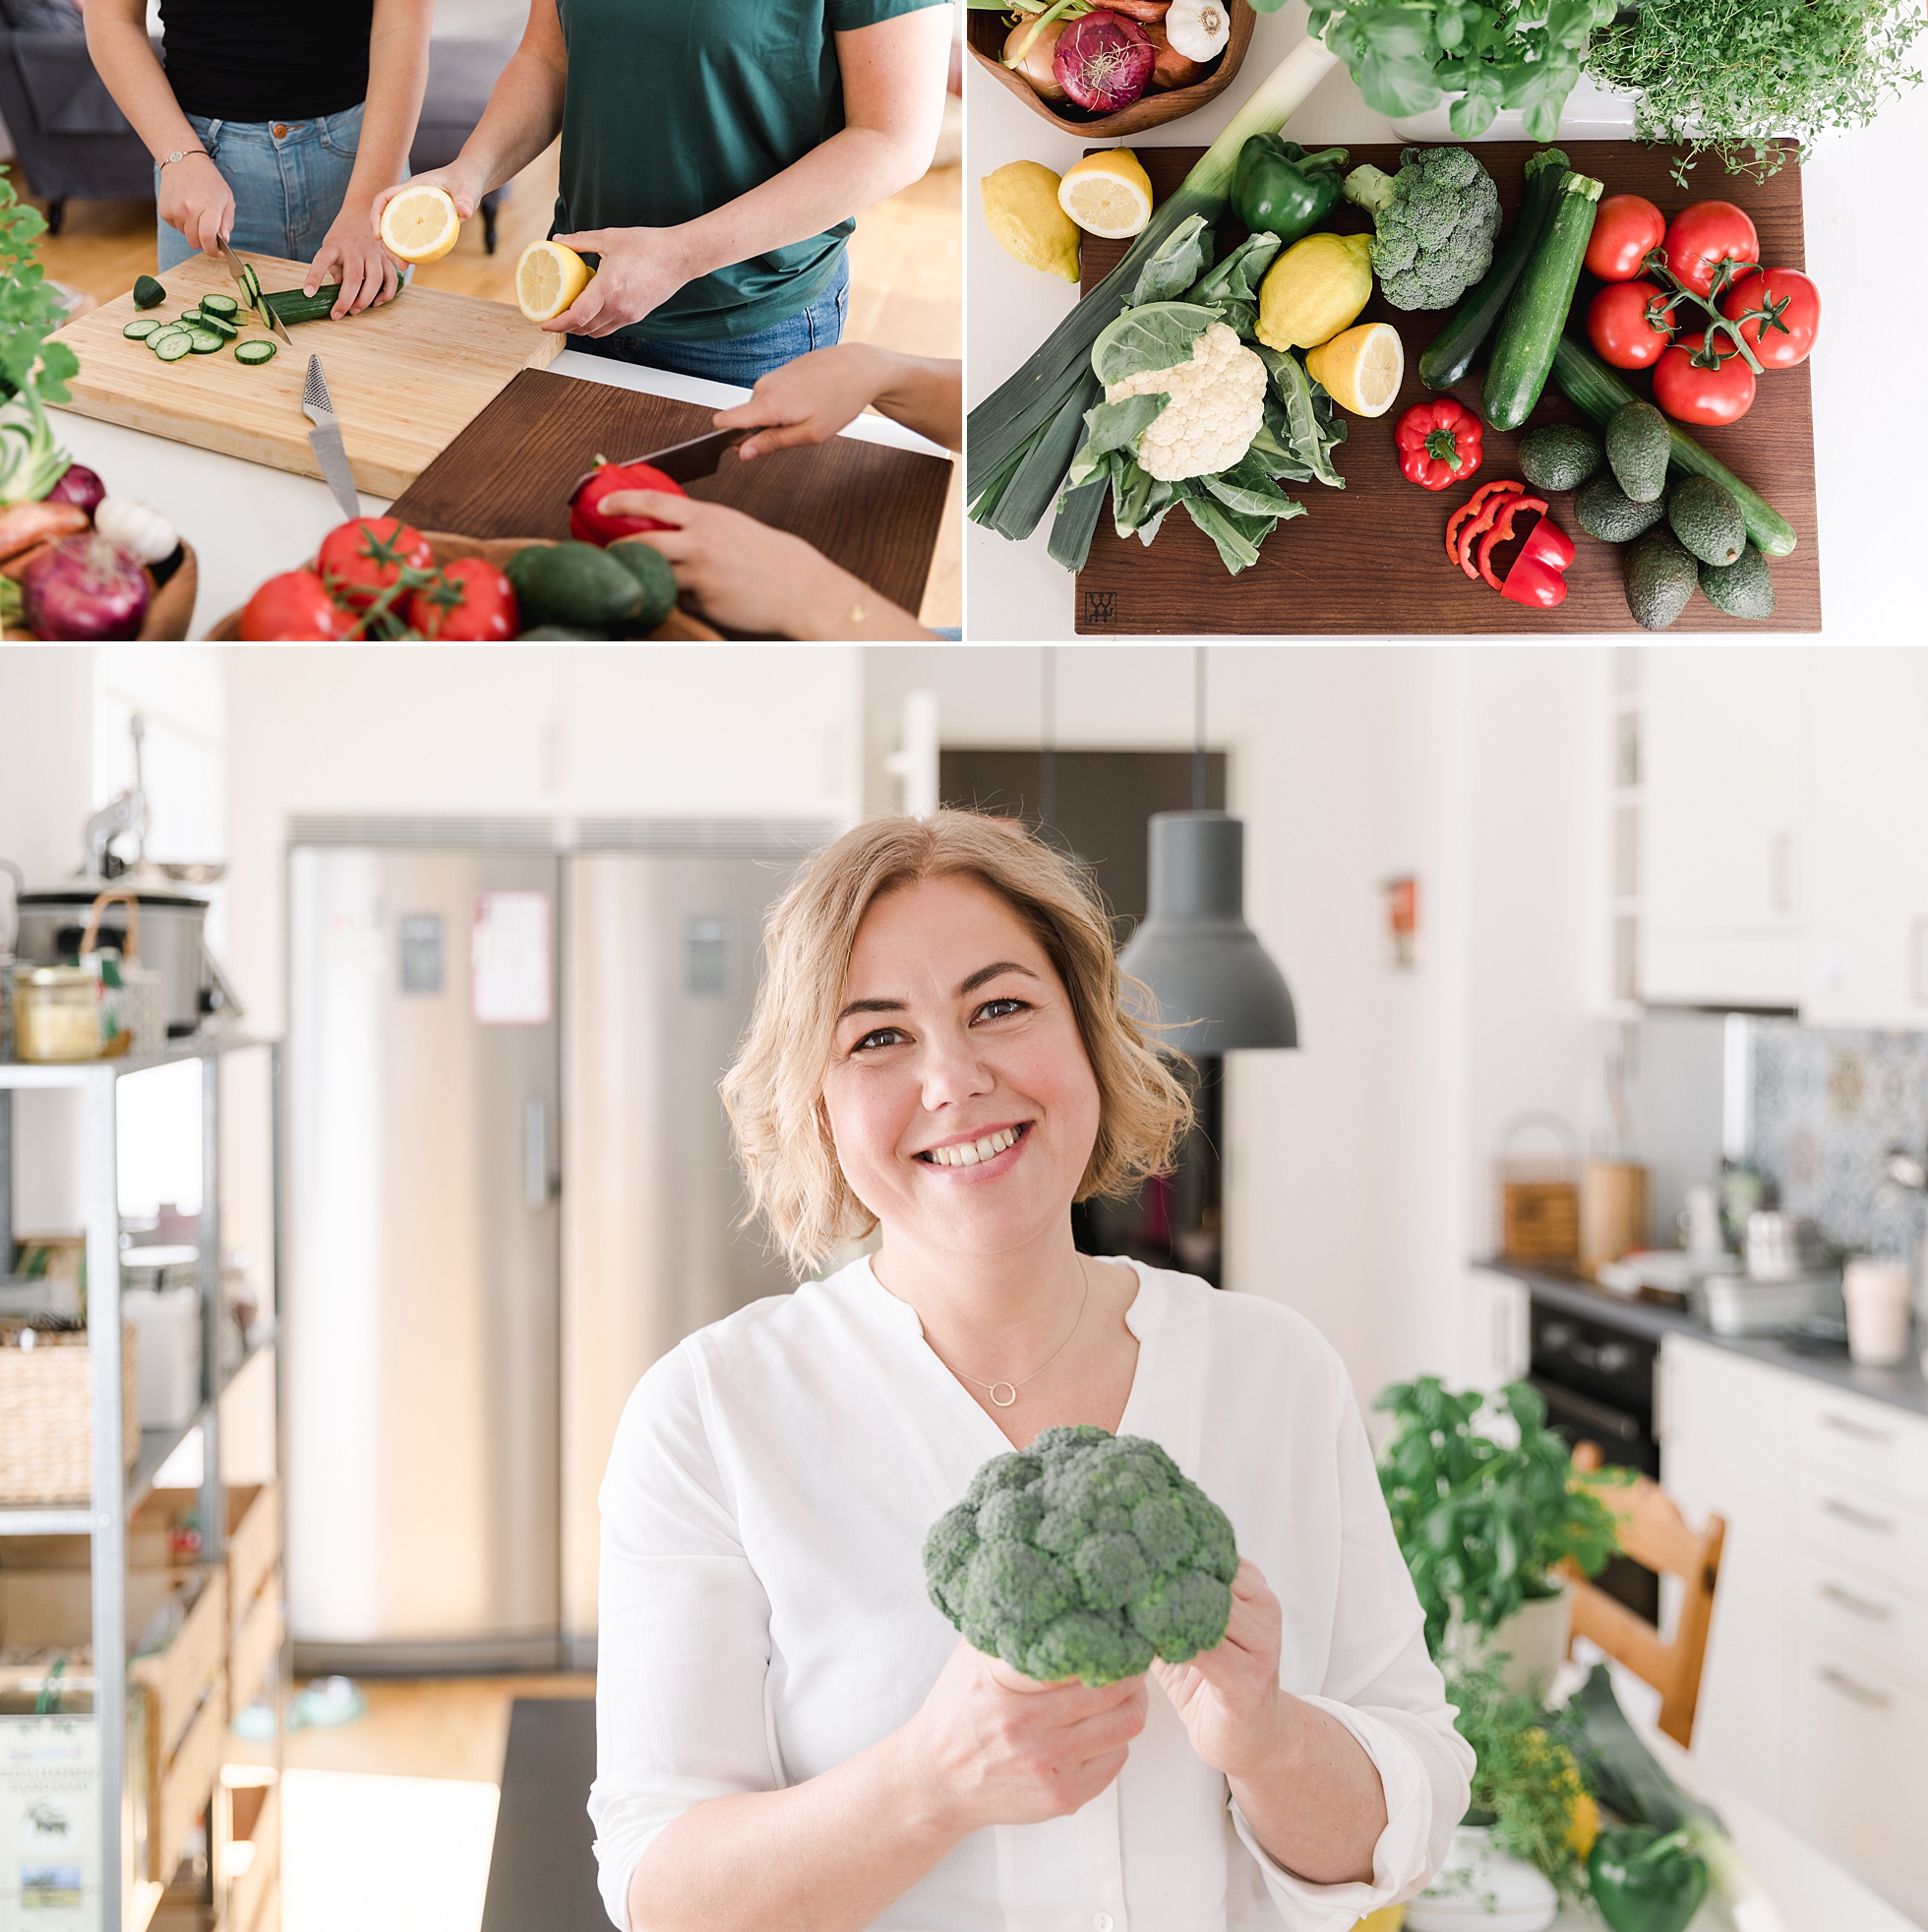 A collage of a woman holding broccoli and preparing healthy food